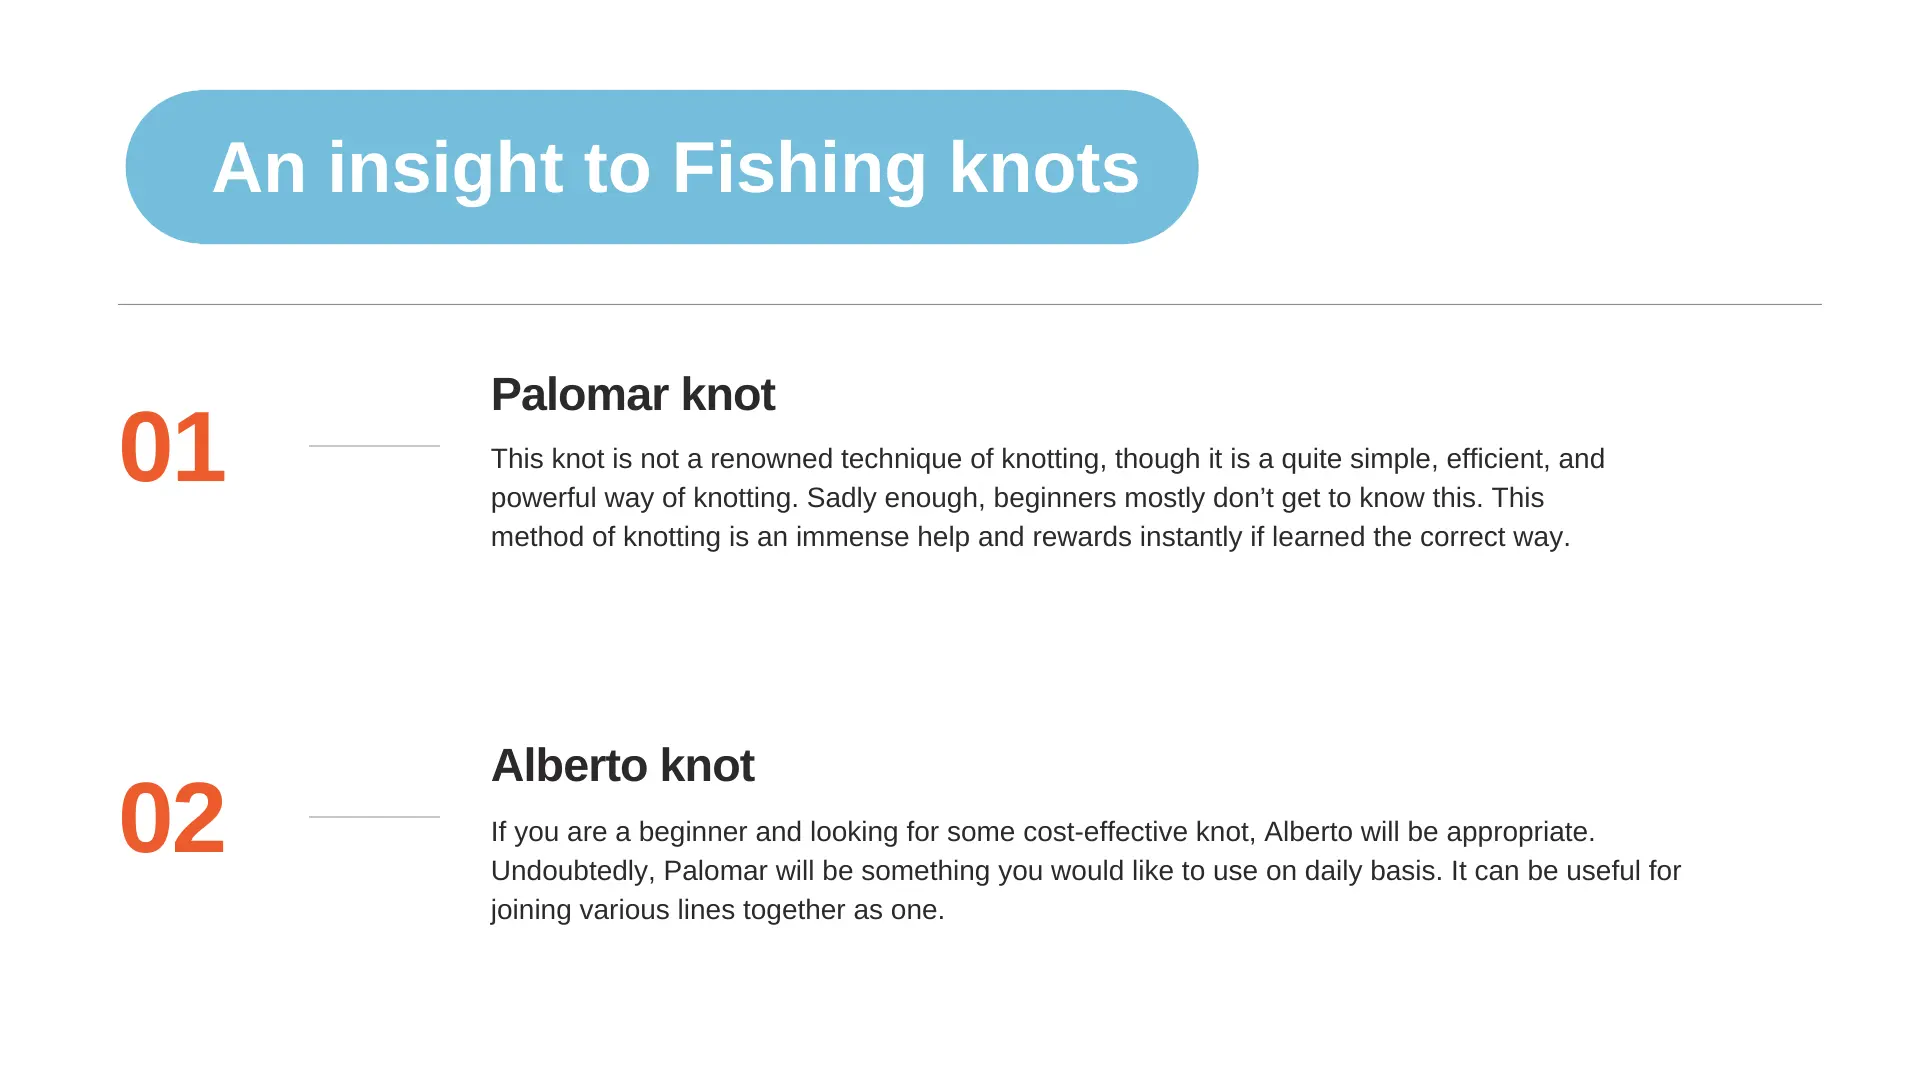 An insight to Fishing knots